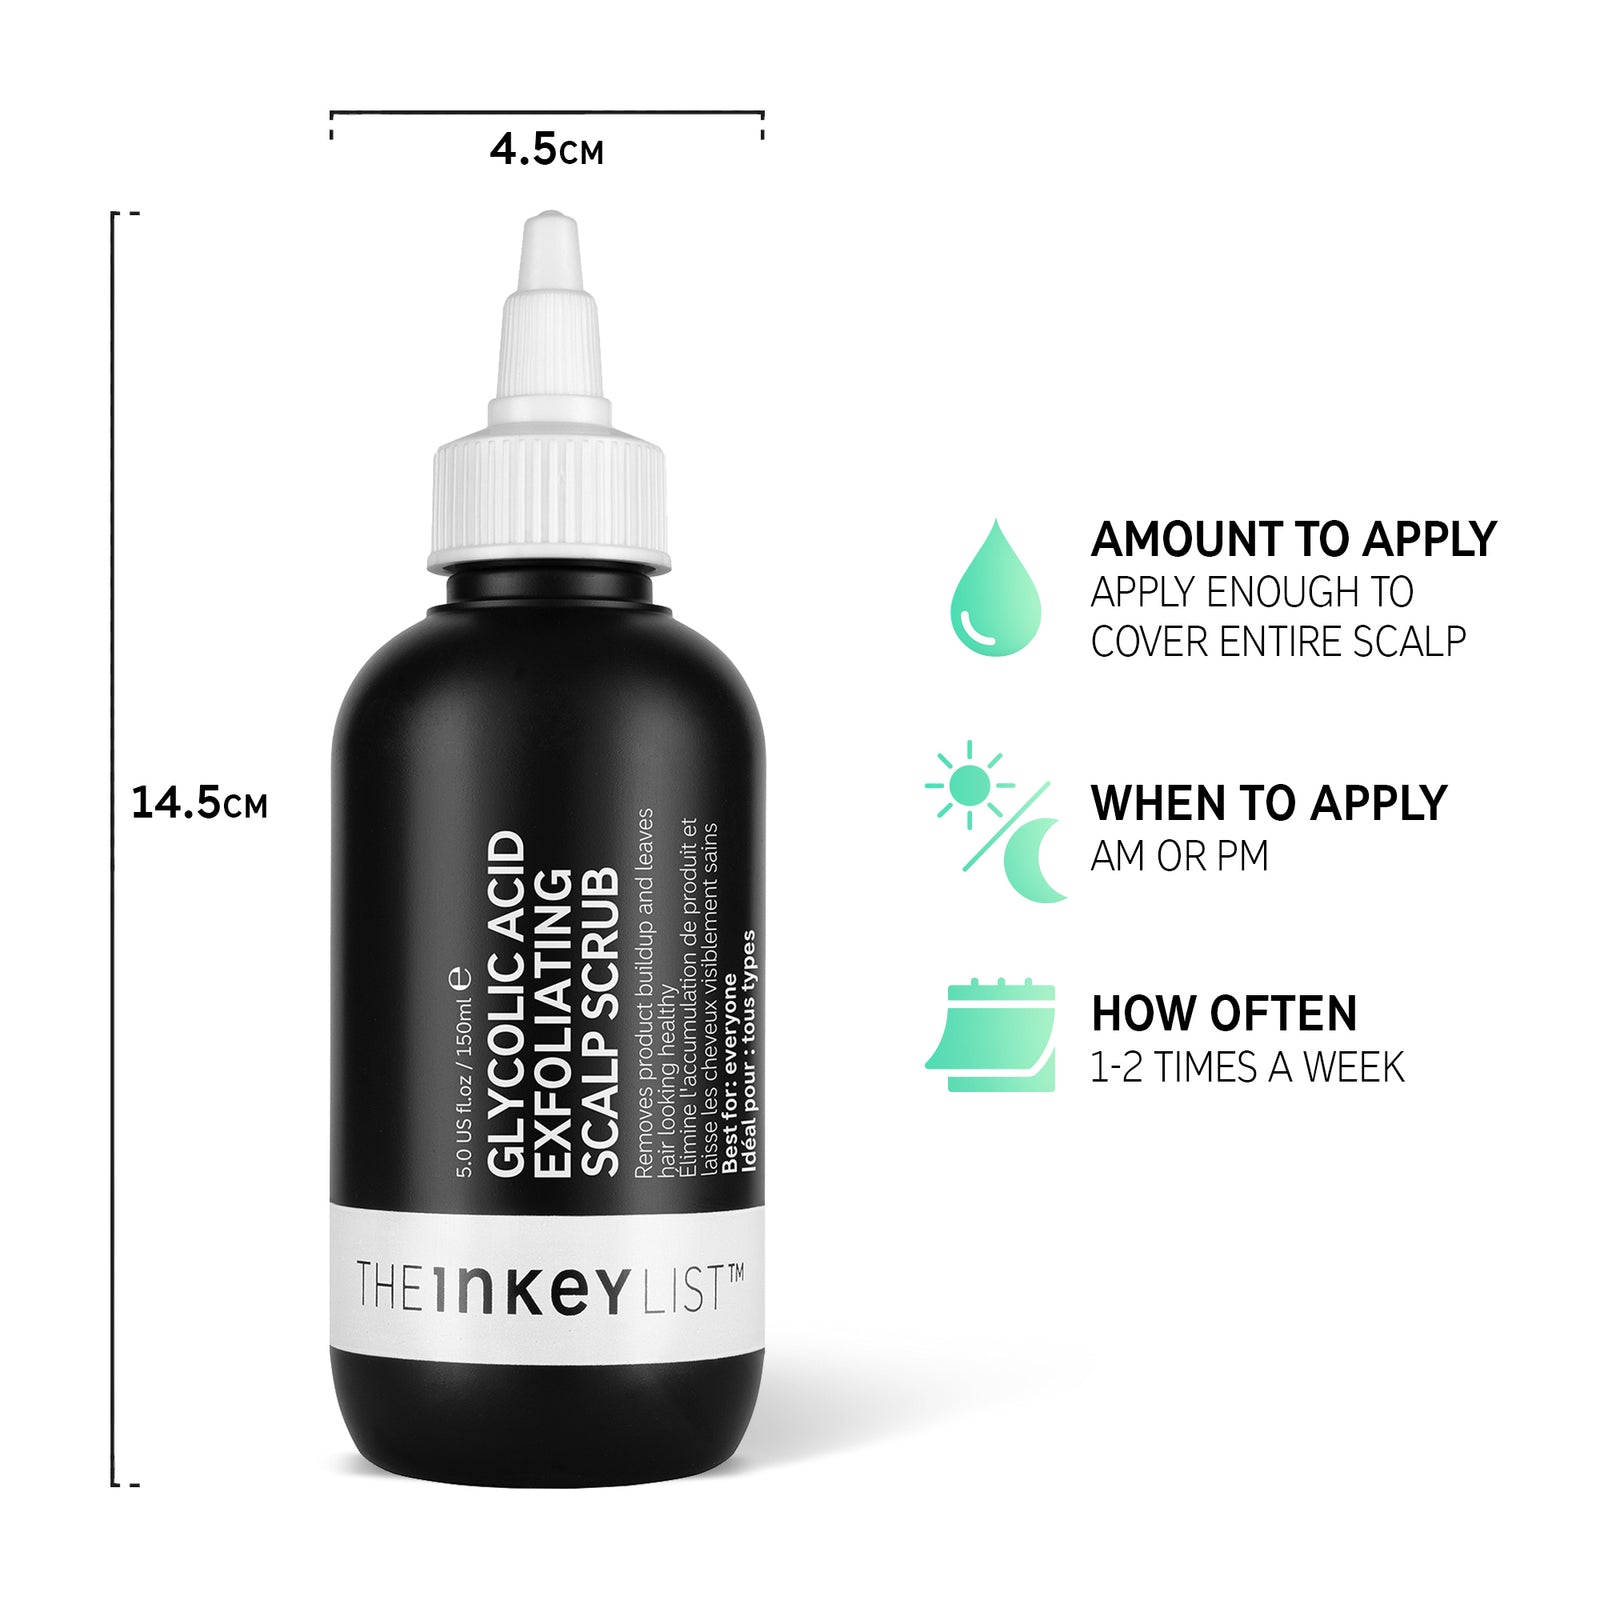 Glycolic Acid Exfoliating Scalp Scrub bottle infographic with bottle dimensions and amount to apply (enough to cover scalp), when to apply (AM or PM) and how often (1-2 times a week)